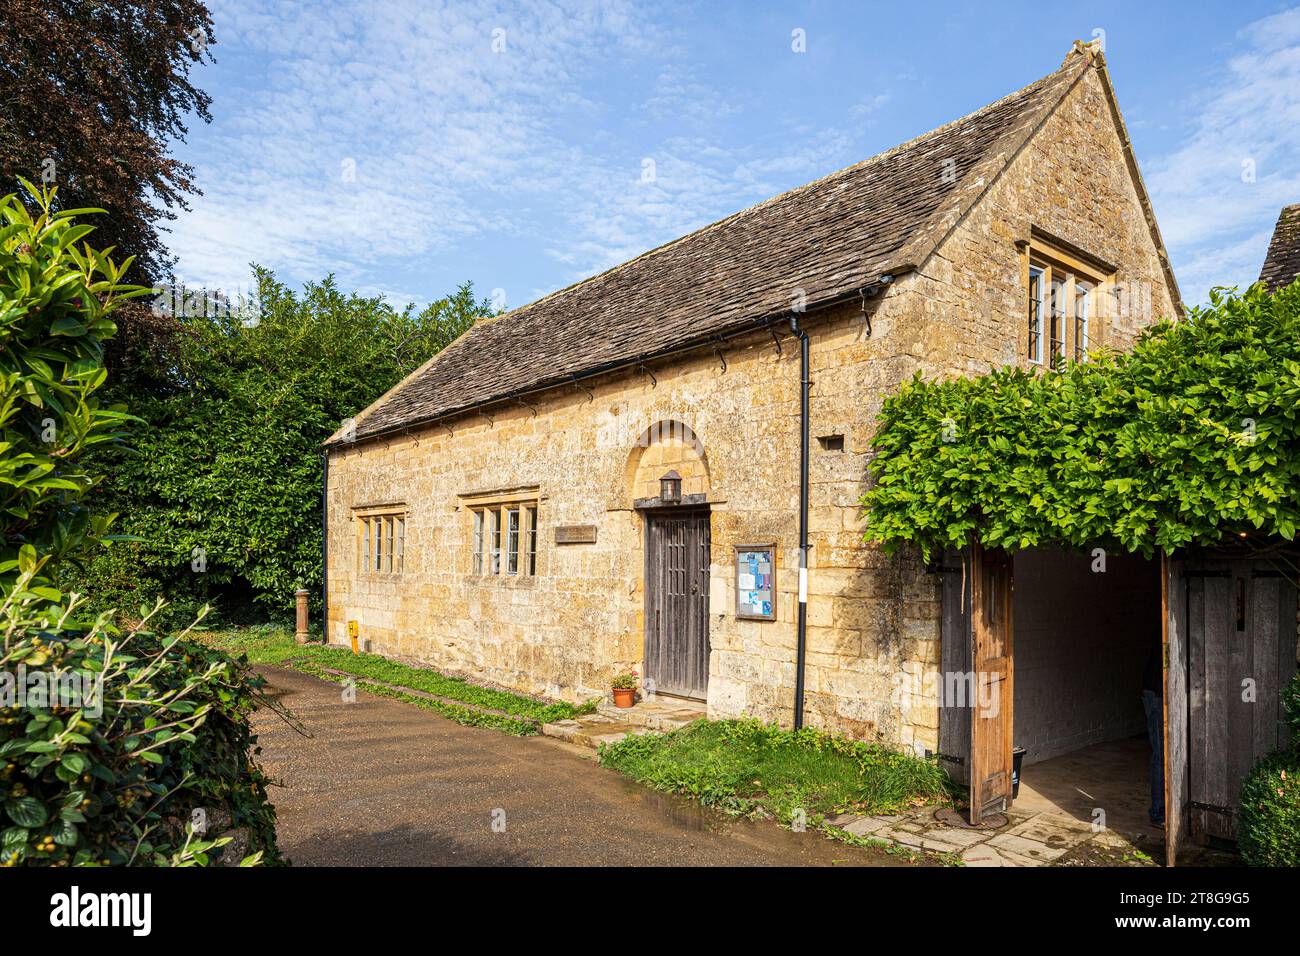 Quaker Friends Meeting House (built 1677) in the Cotswold village of Broad Campden, Gloucestershire, England UK Stock Photo